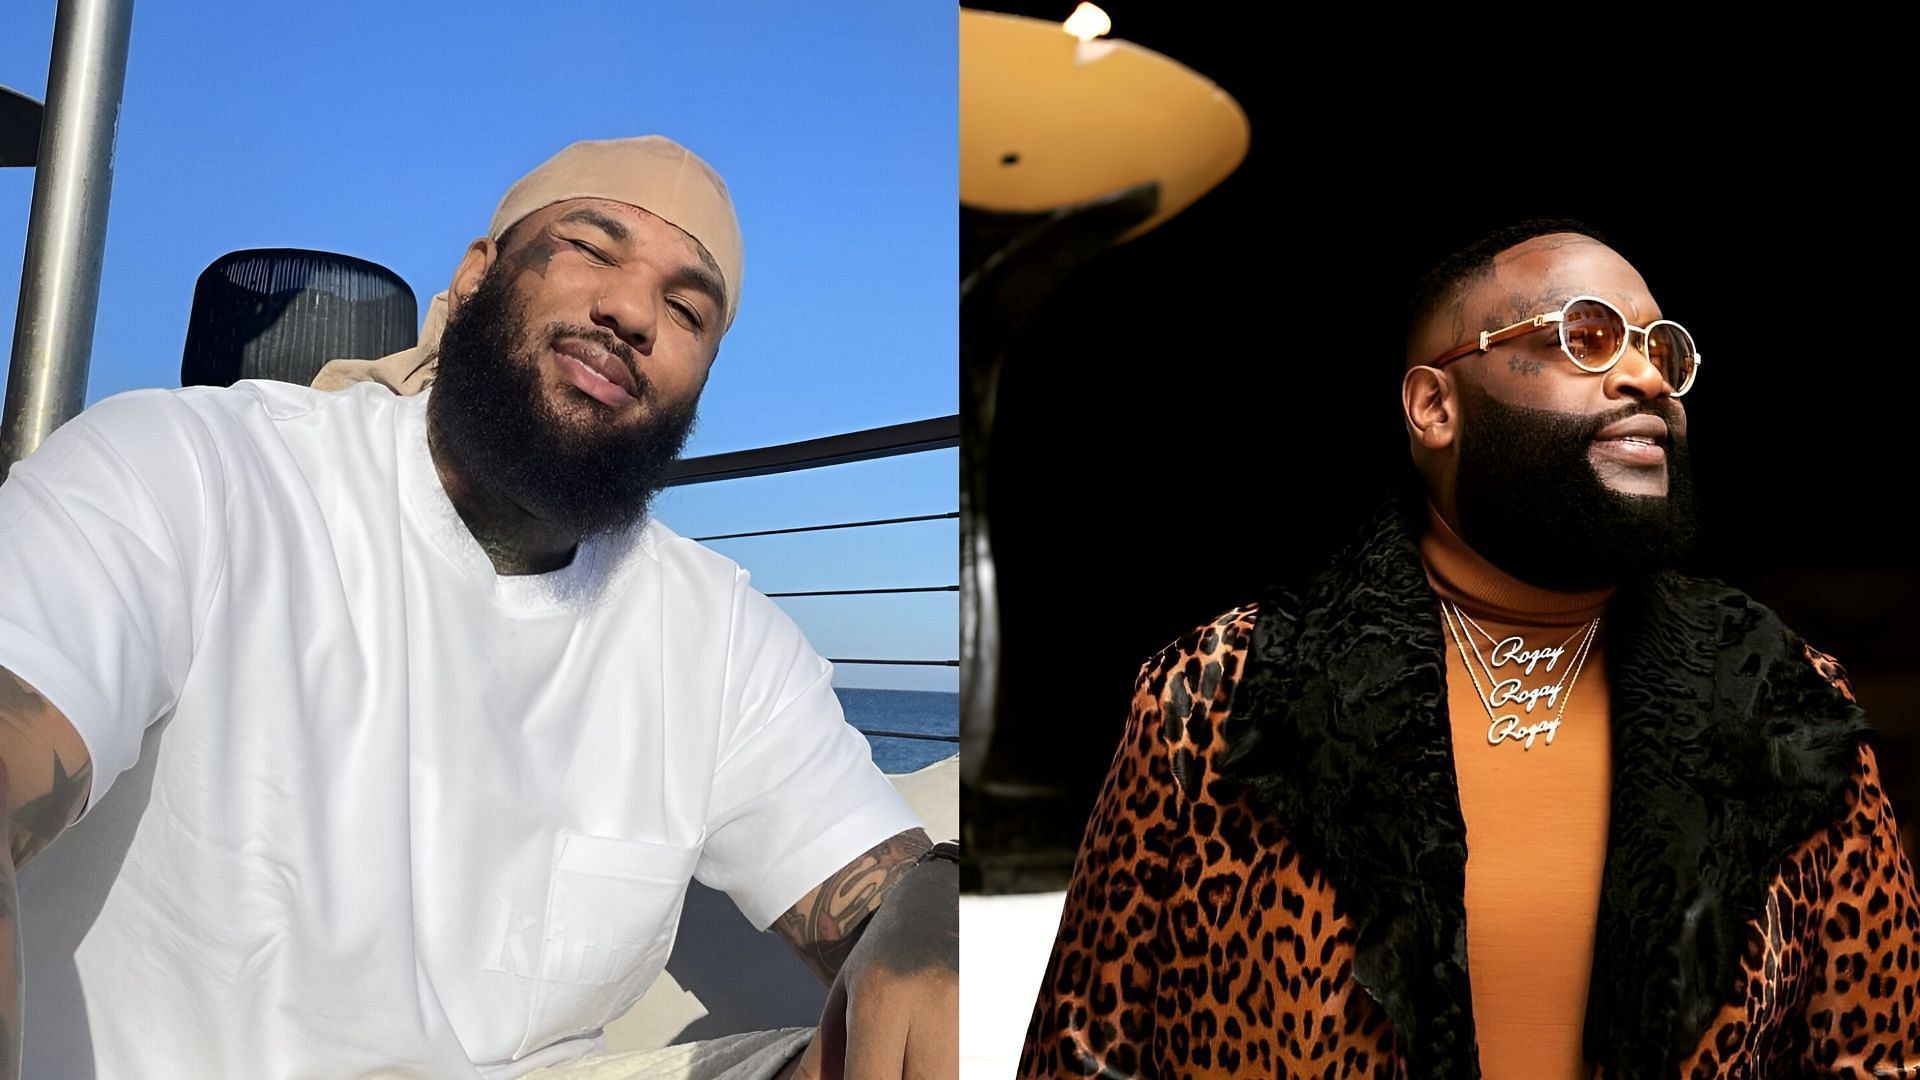 The Game drops his scathing Rick Ross diss track. (Image via Facebook/The Game, Instagram/@richbyrickross)